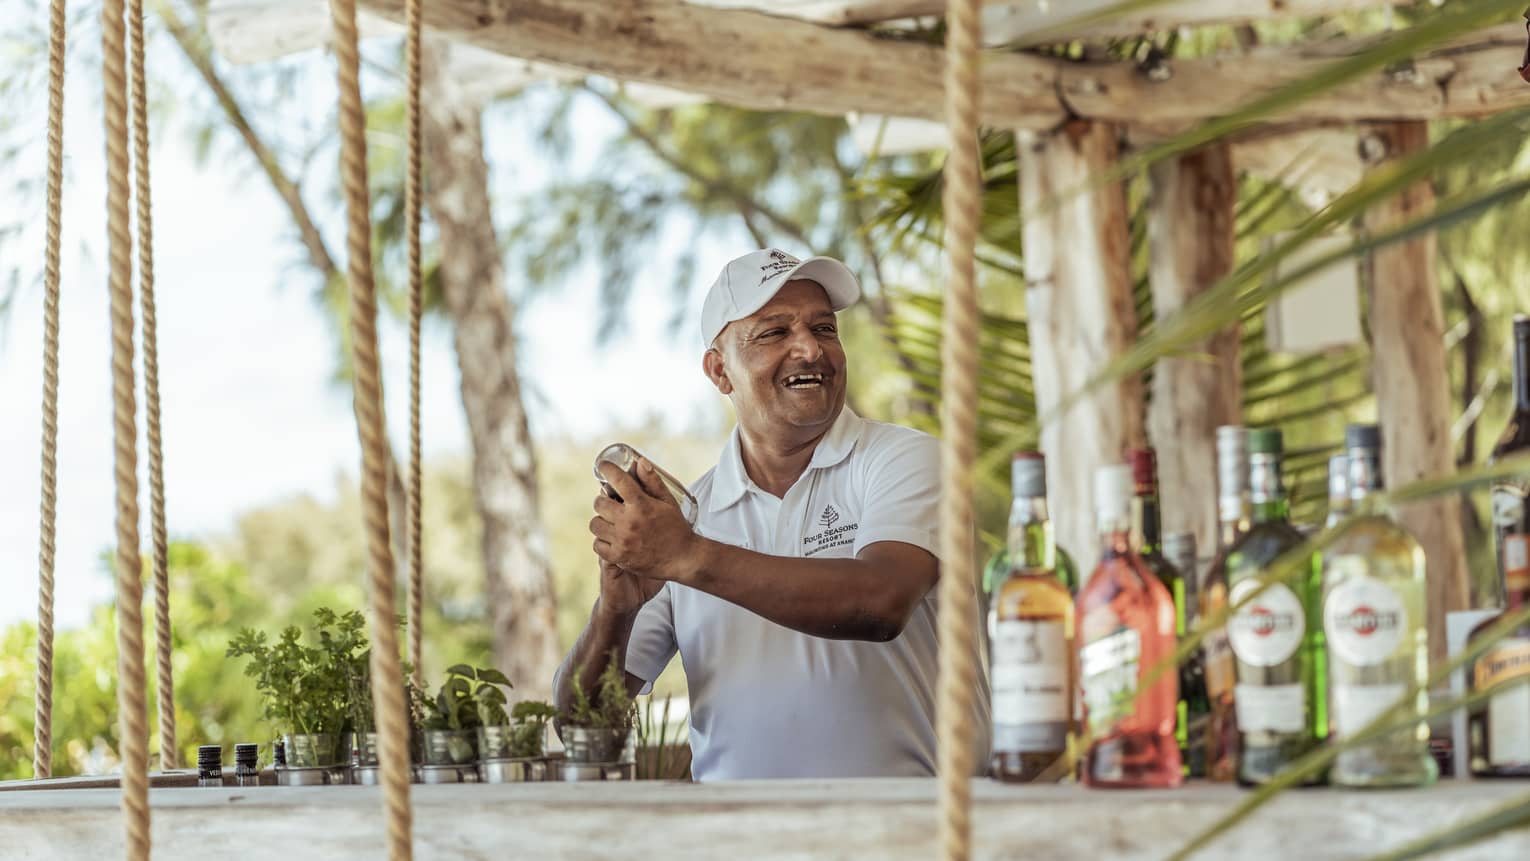 A smiling bartender in a ball cap shakes up a cocktail